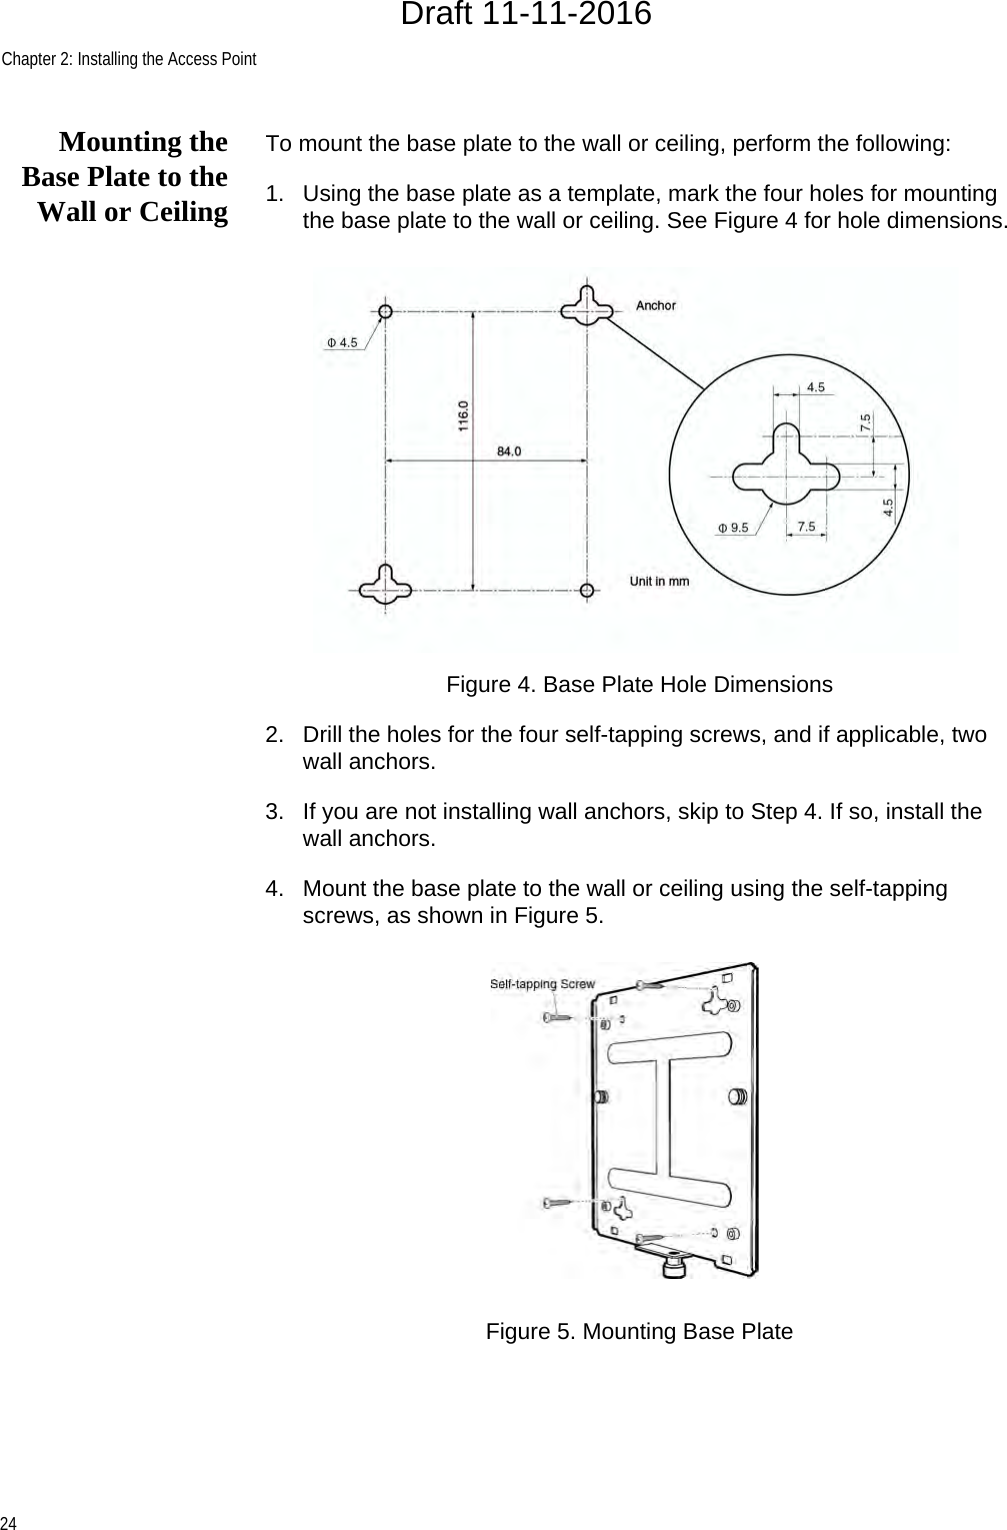 Chapter 2: Installing the Access Point24Mounting theBase Plate to theWall or CeilingTo mount the base plate to the wall or ceiling, perform the following:1. Using the base plate as a template, mark the four holes for mounting the base plate to the wall or ceiling. See Figure 4 for hole dimensions.Figure 4. Base Plate Hole Dimensions2. Drill the holes for the four self-tapping screws, and if applicable, two wall anchors.3. If you are not installing wall anchors, skip to Step 4. If so, install the wall anchors.4. Mount the base plate to the wall or ceiling using the self-tapping screws, as shown in Figure 5.Figure 5. Mounting Base PlateDraft 11-11-2016